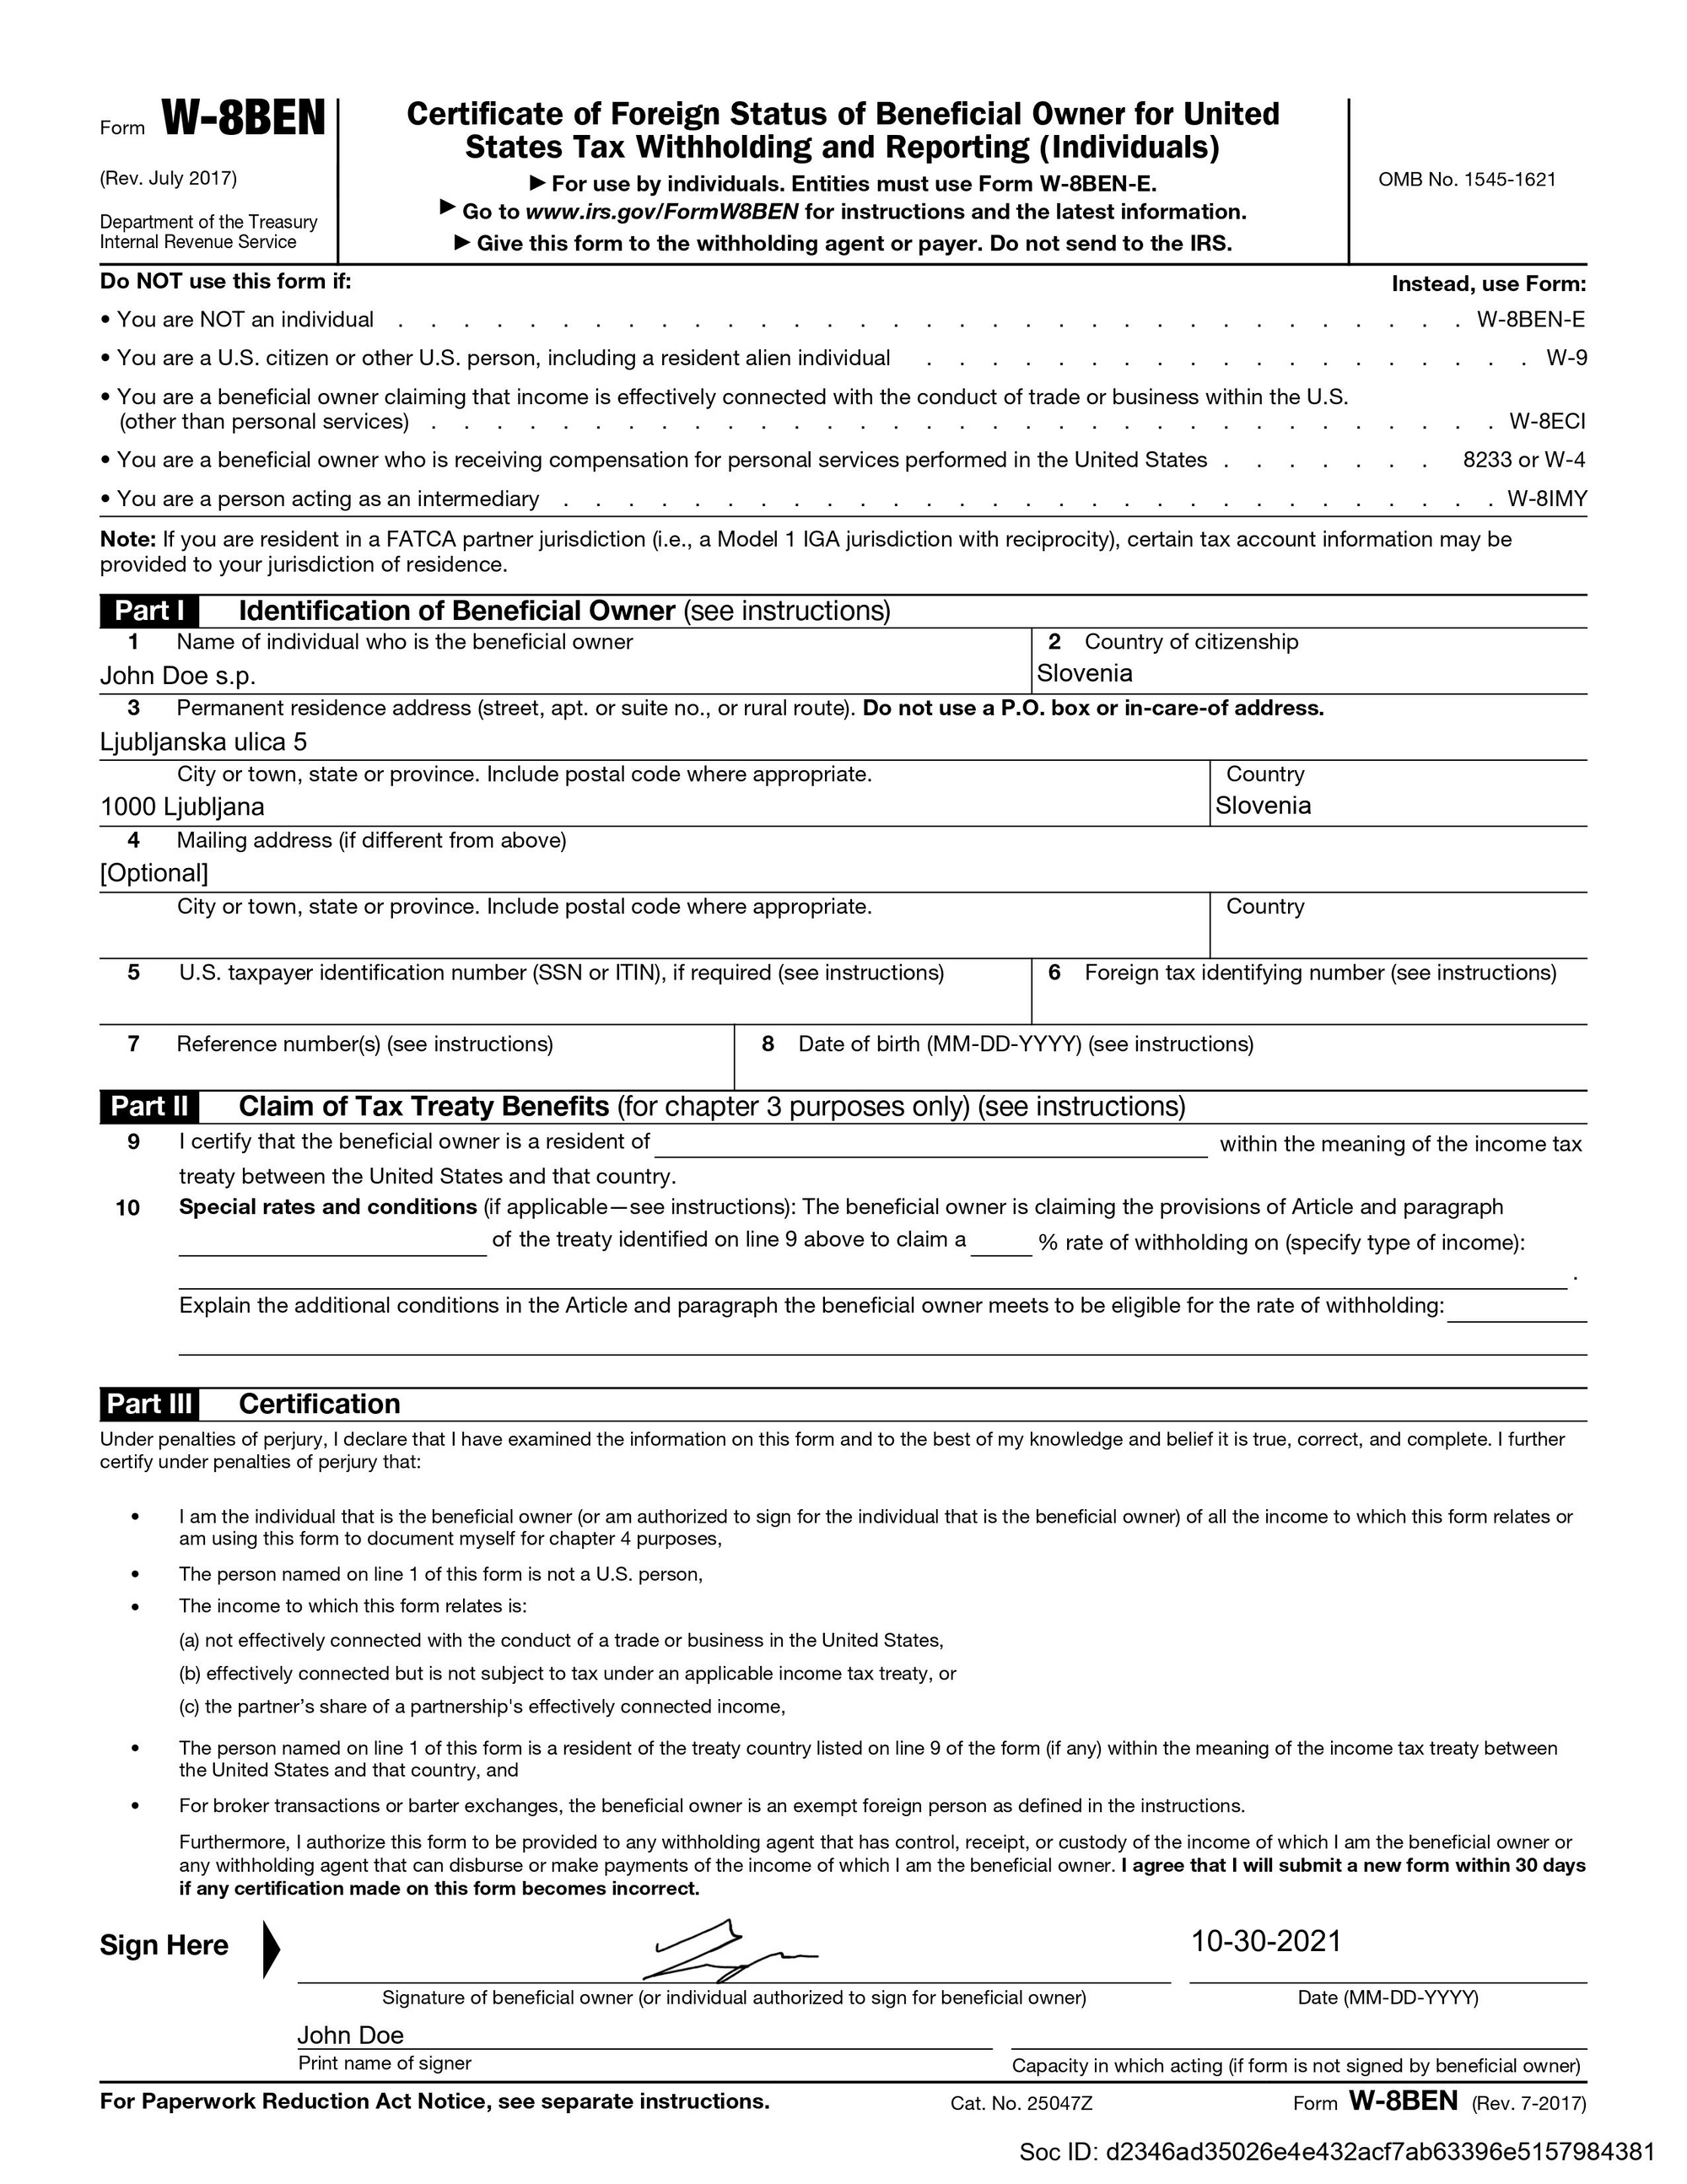 How Should An Engineer Fill Out W8BEN Form?